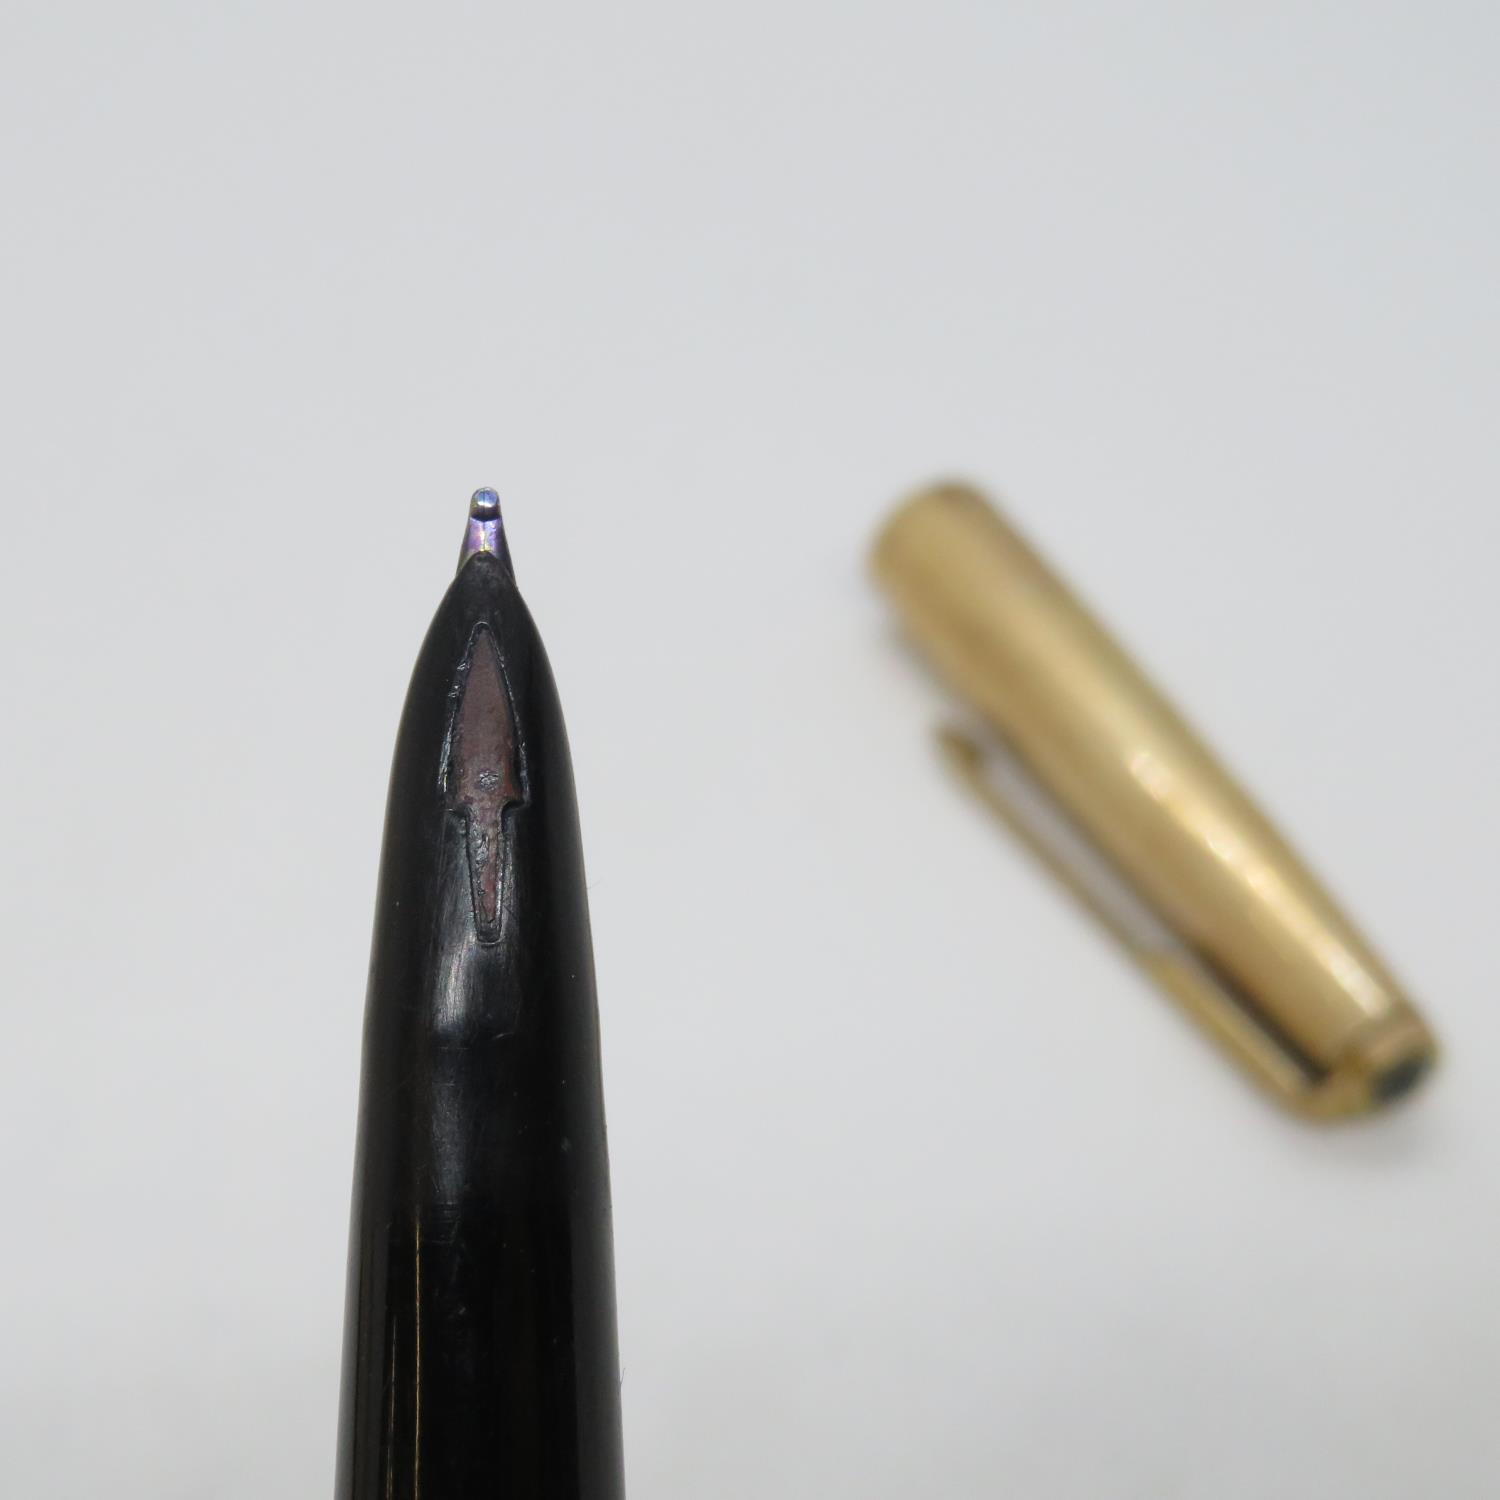 Parker 61 fountain pen slight damage (crack) to pen body otherwise good condition - Image 4 of 4